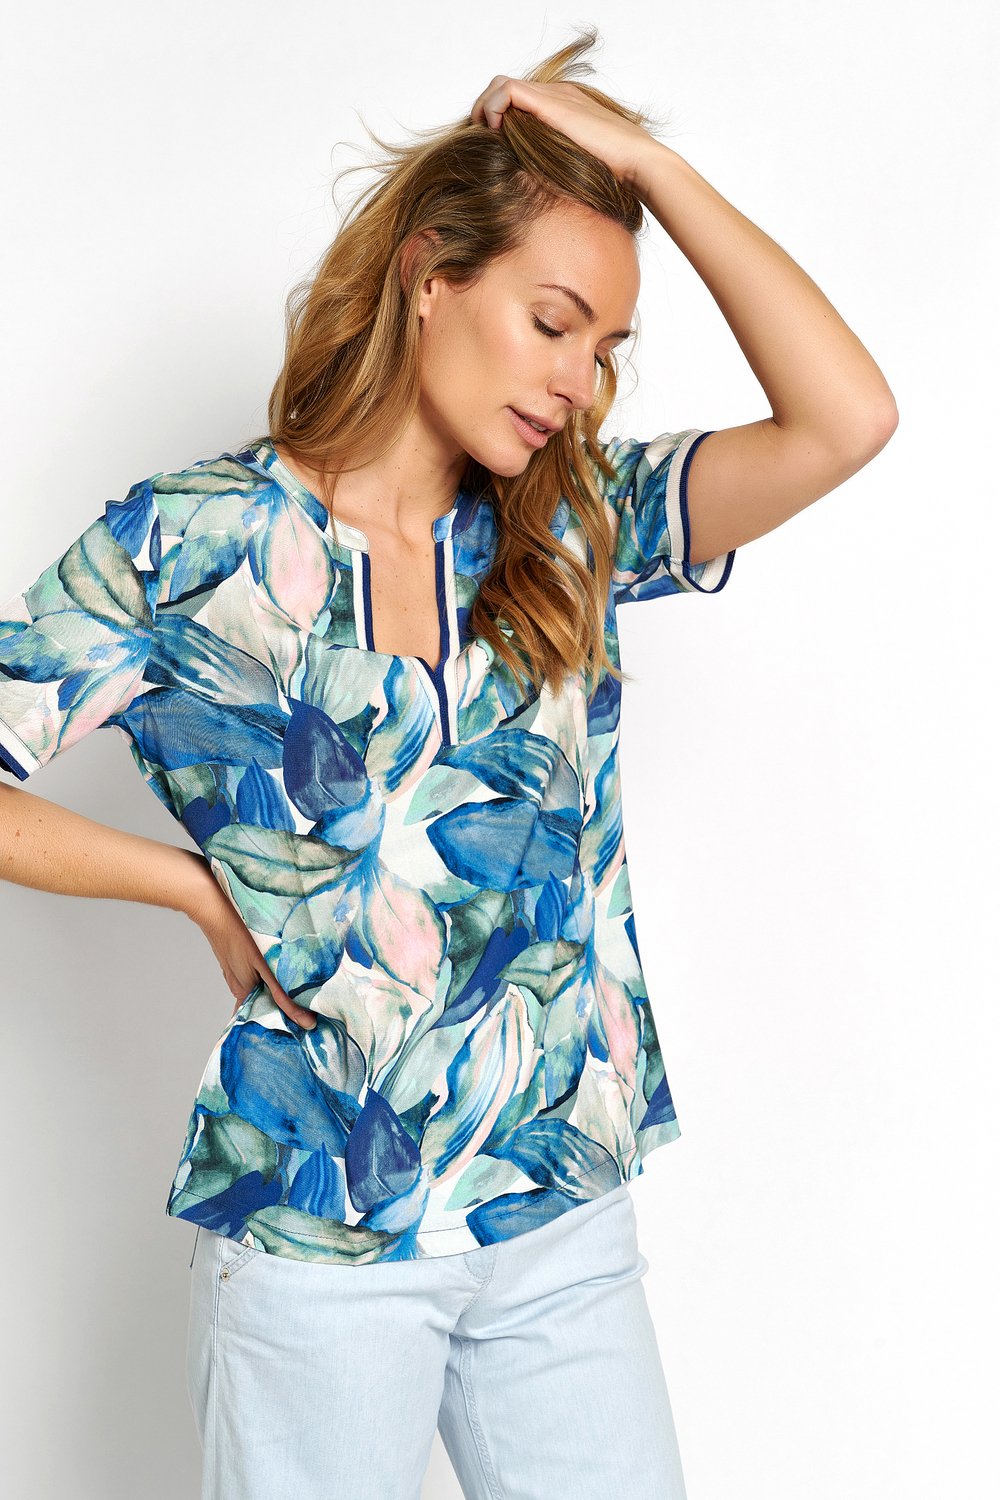 Shirt with a tropic print | Style »Alina« multicolour blue